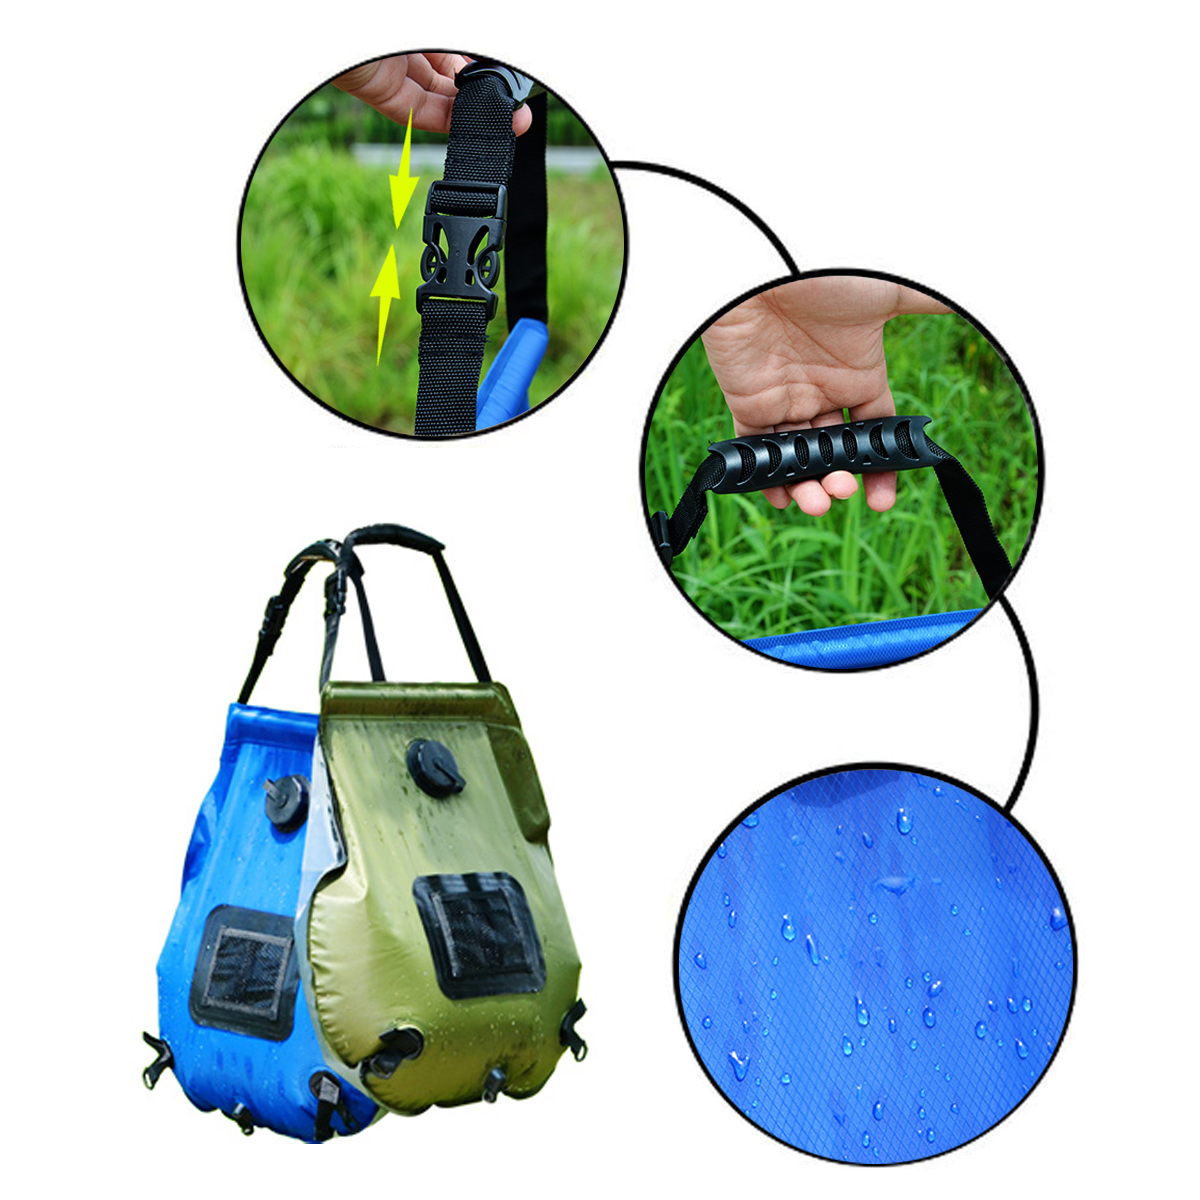 20L-Foldable-Portable-Water-Shower-Bathing-Bag-Solar-Energy-Heated-PVC-Outdoor-Travel-Camping-1724741-8